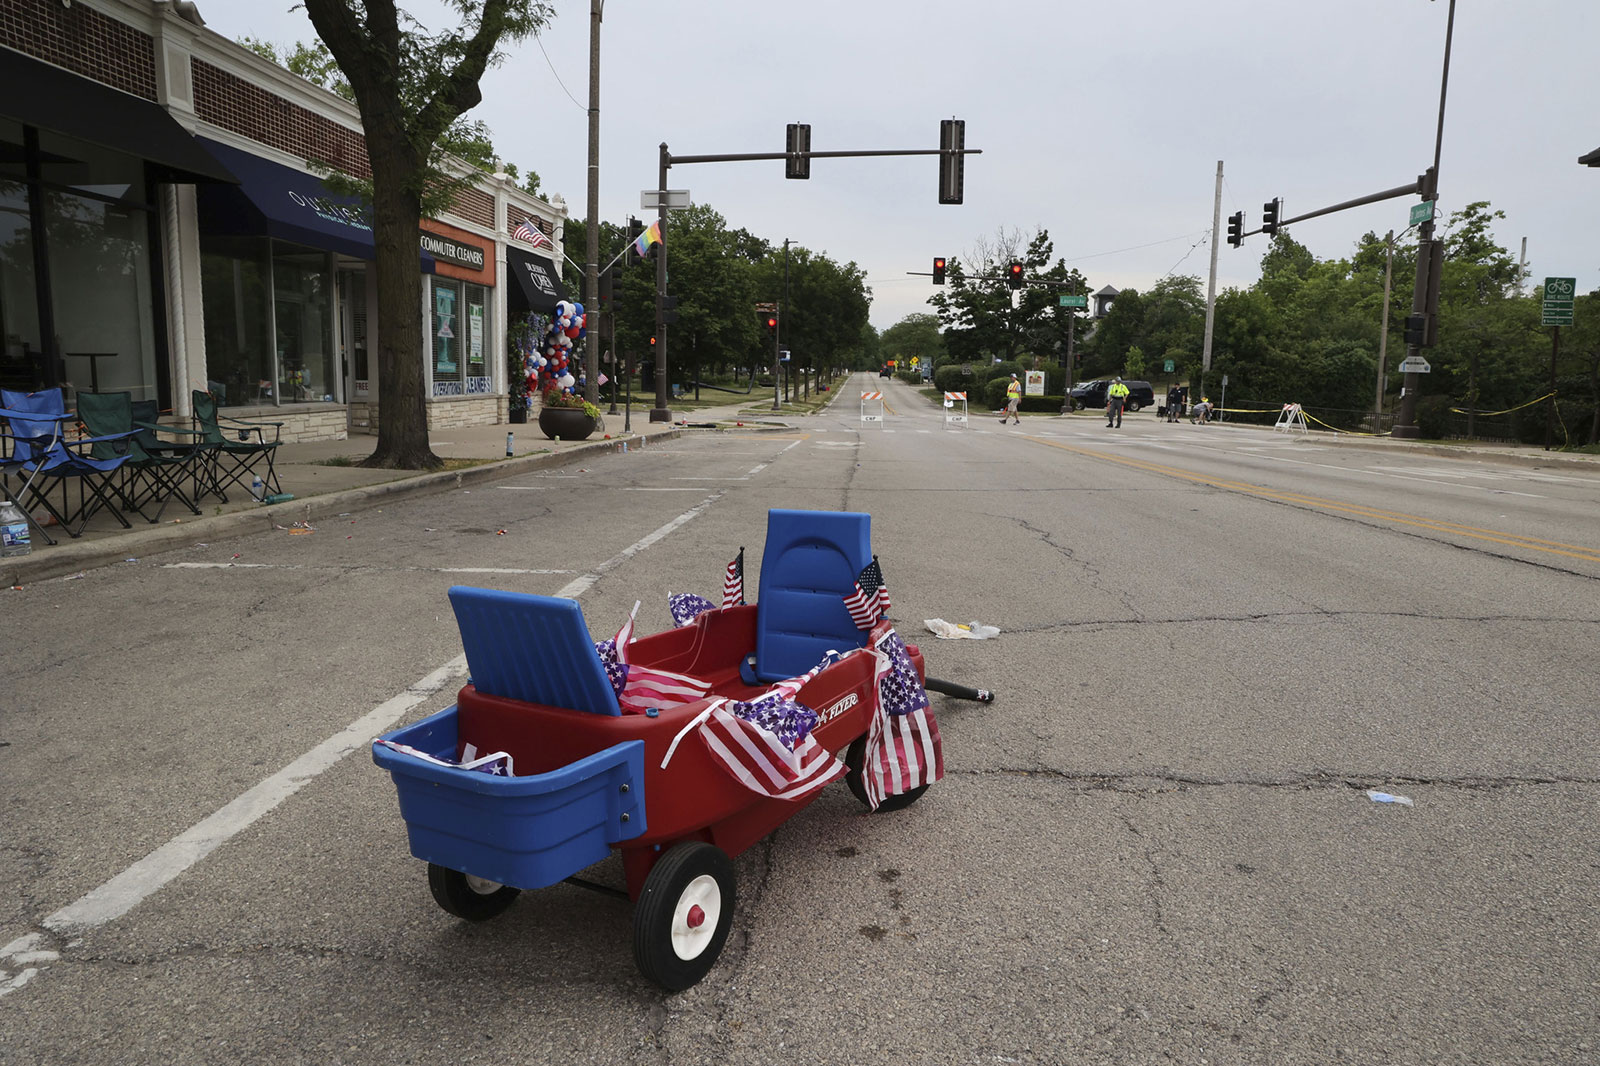 An empty wagon and American flags remain near the scene of the shooting in Highland Park, Illinois, on Monday, July 4.